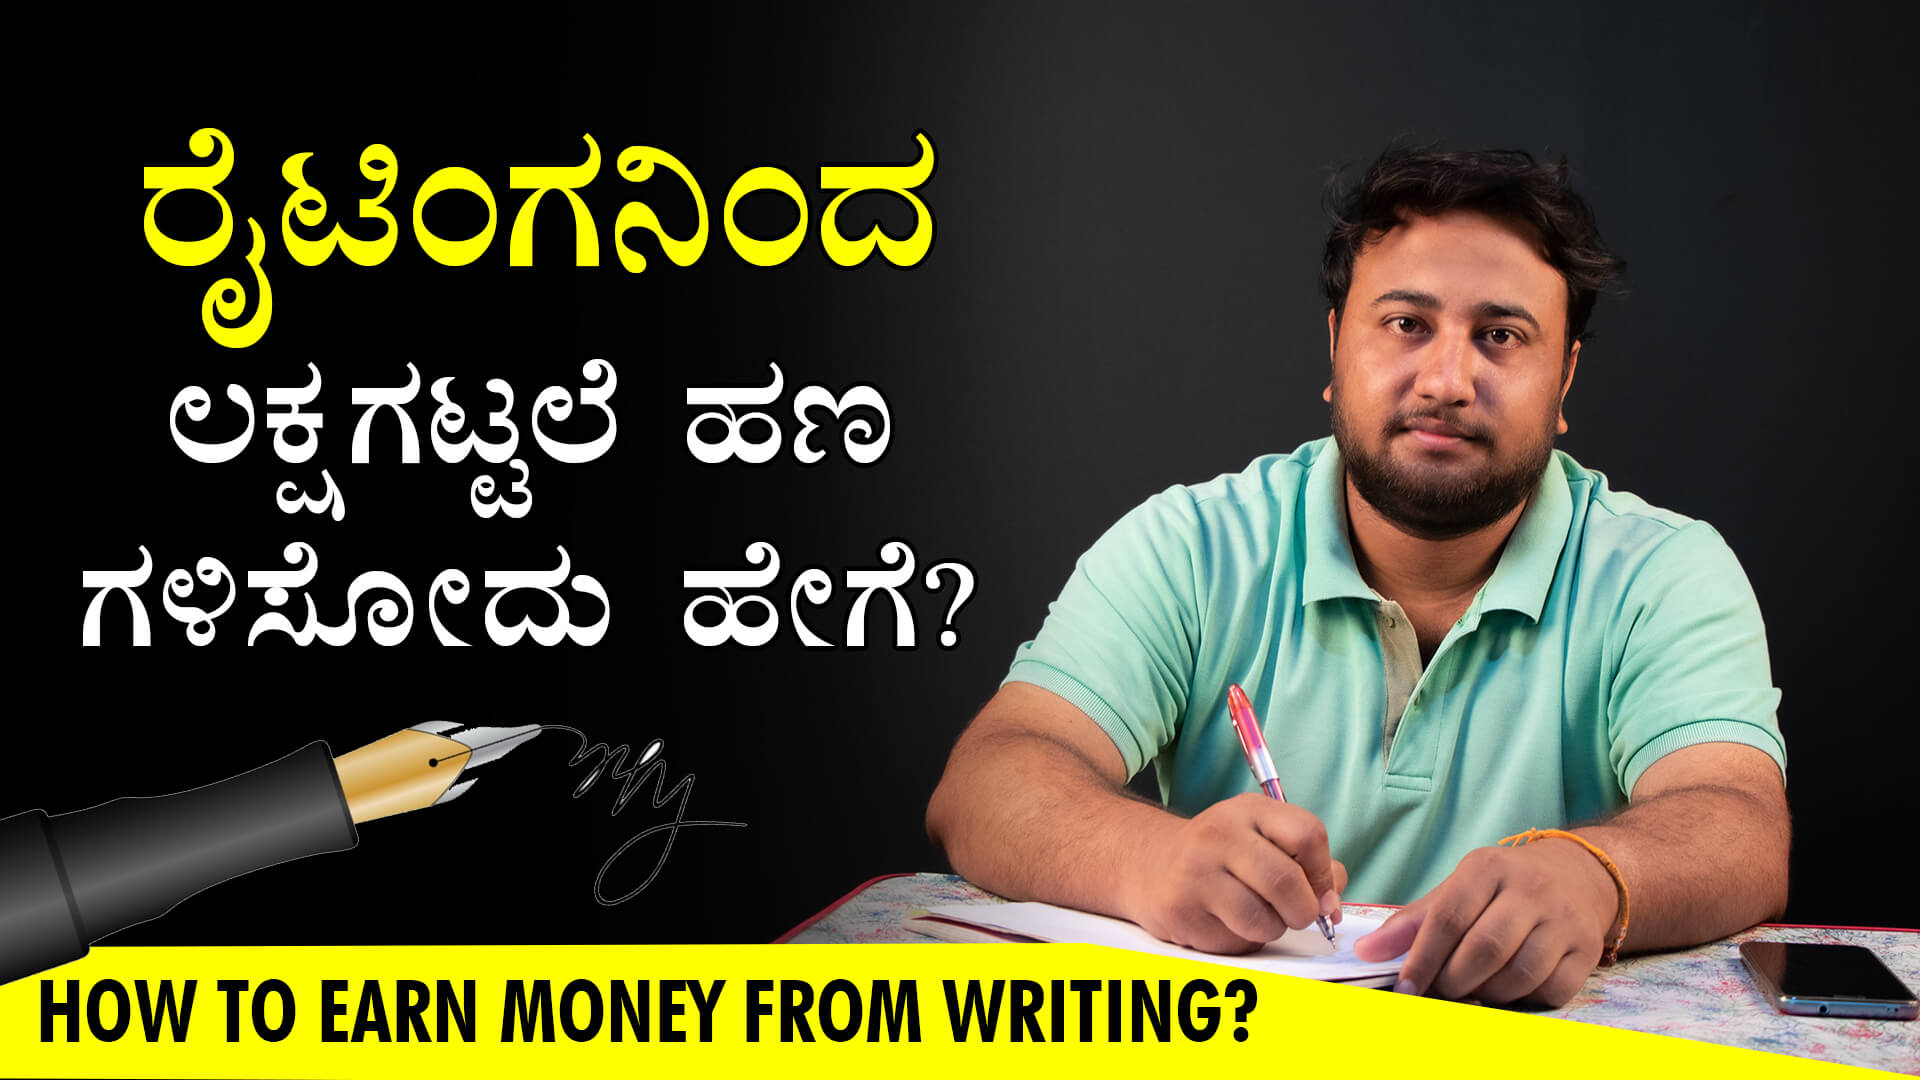 You are currently viewing ರೈಟಿಂಗನಿಂದ ಲಕ್ಷಗಟ್ಟಲೆ ಹಣ ಗಳಿಸೋದು ಹೇಗೆ? – How to Earn Money from Writing? in Kannada – Earn Money from Kannada Blog